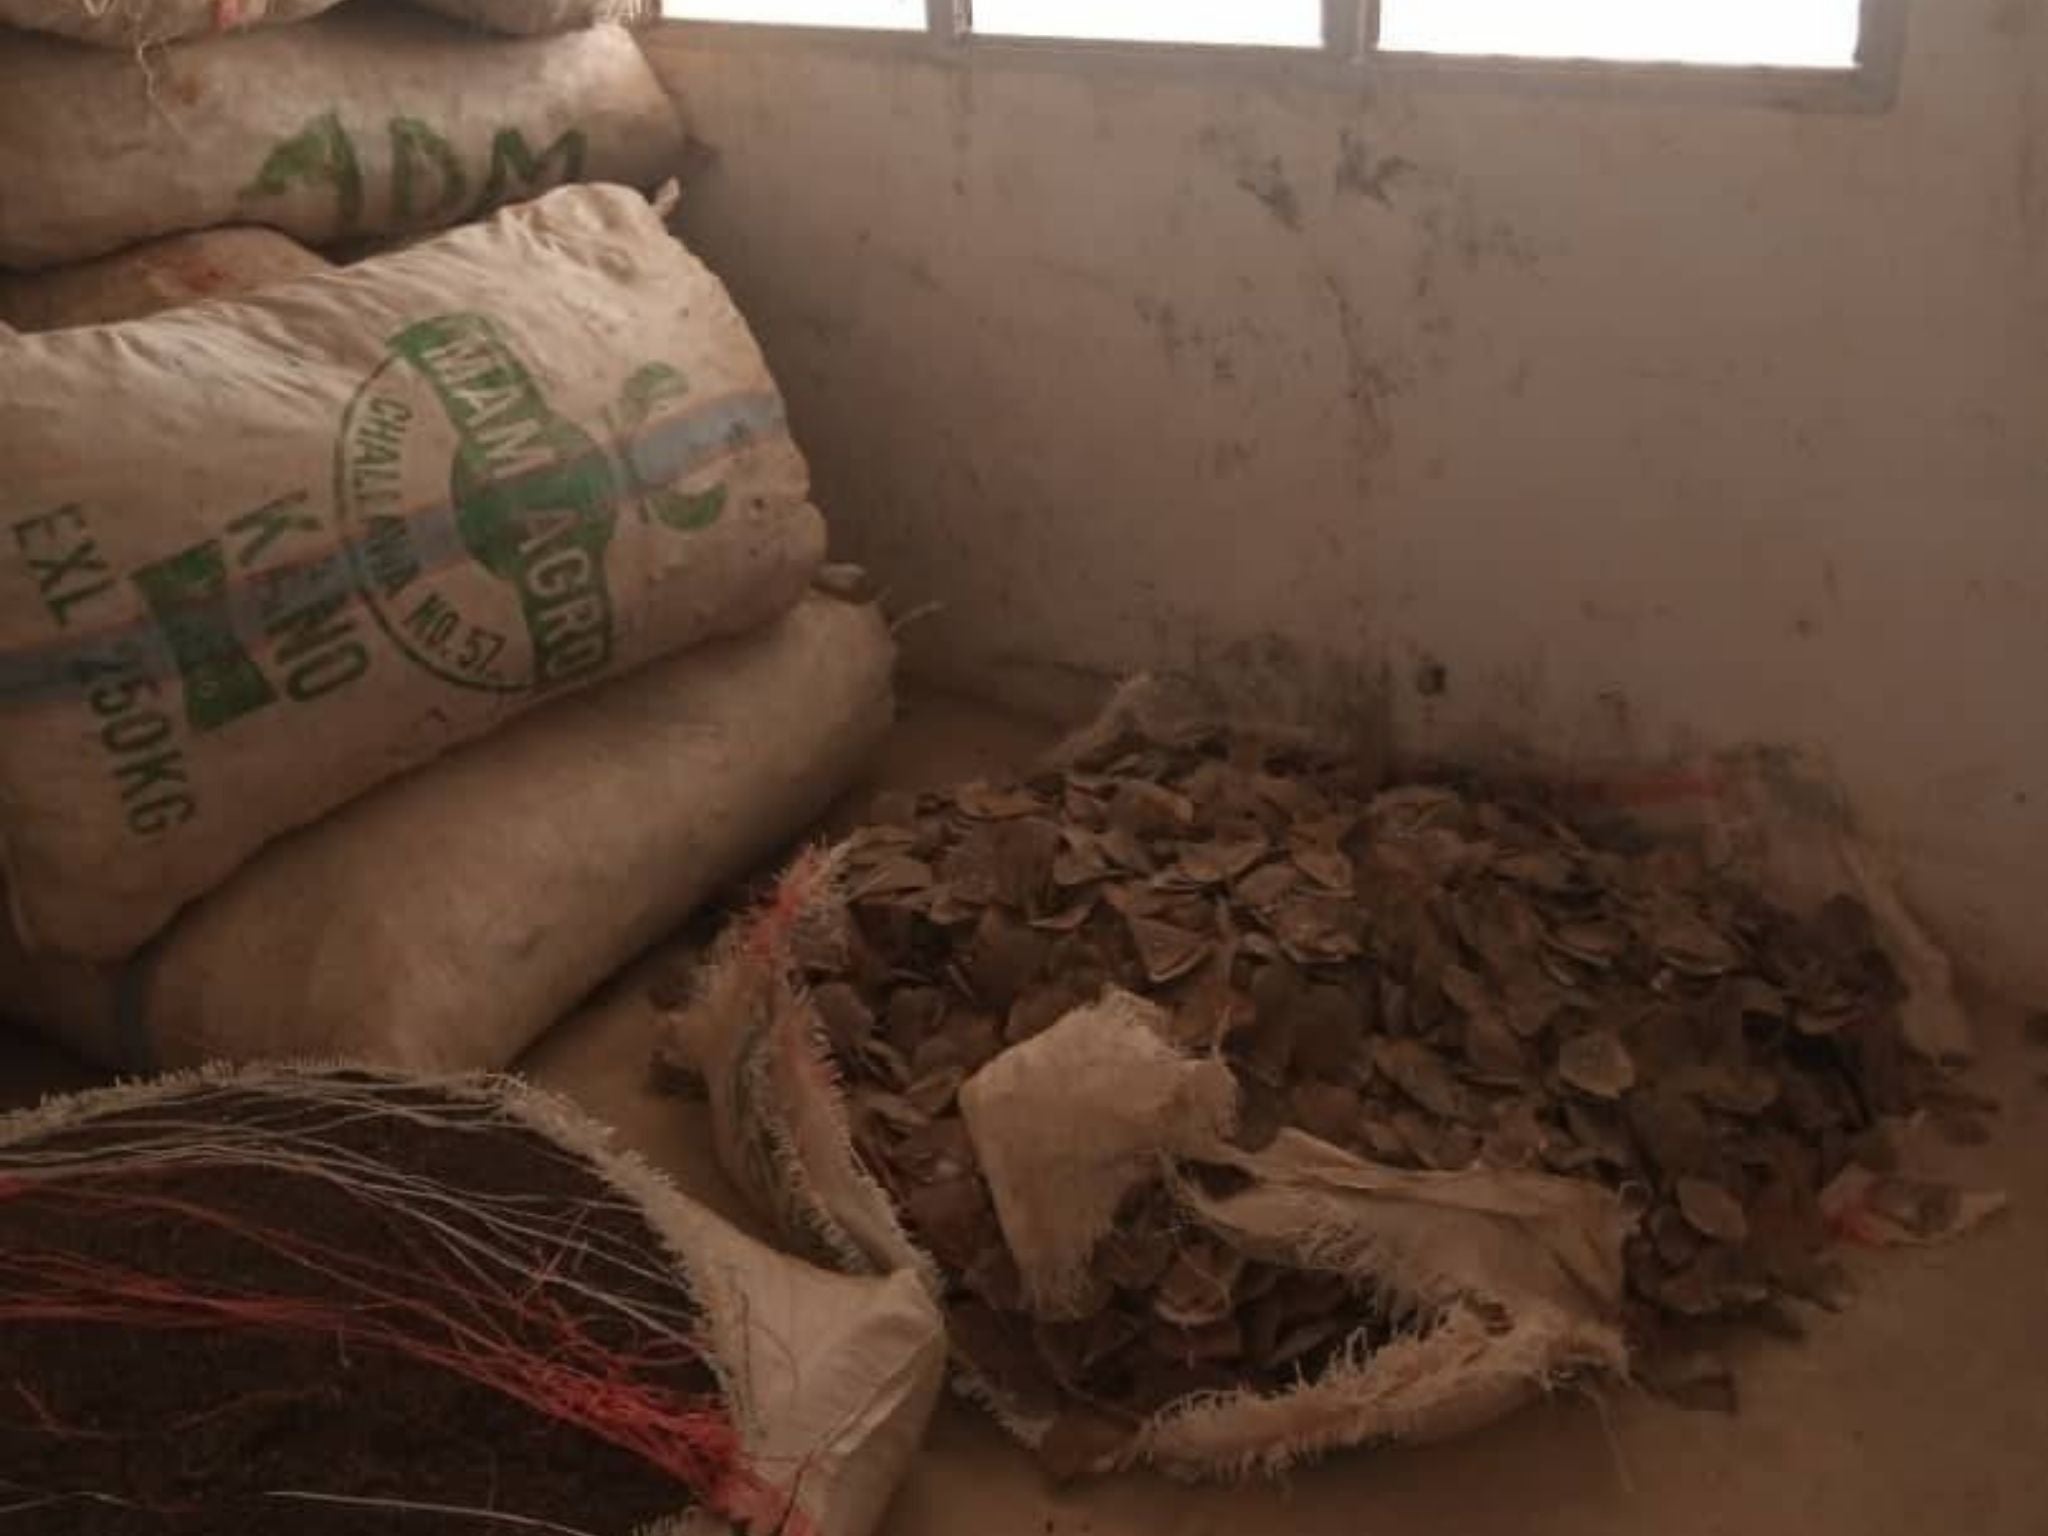 Thousands of pangolin scales disguised as foodstuffs were seized at Cameroon’s border with Nigeria